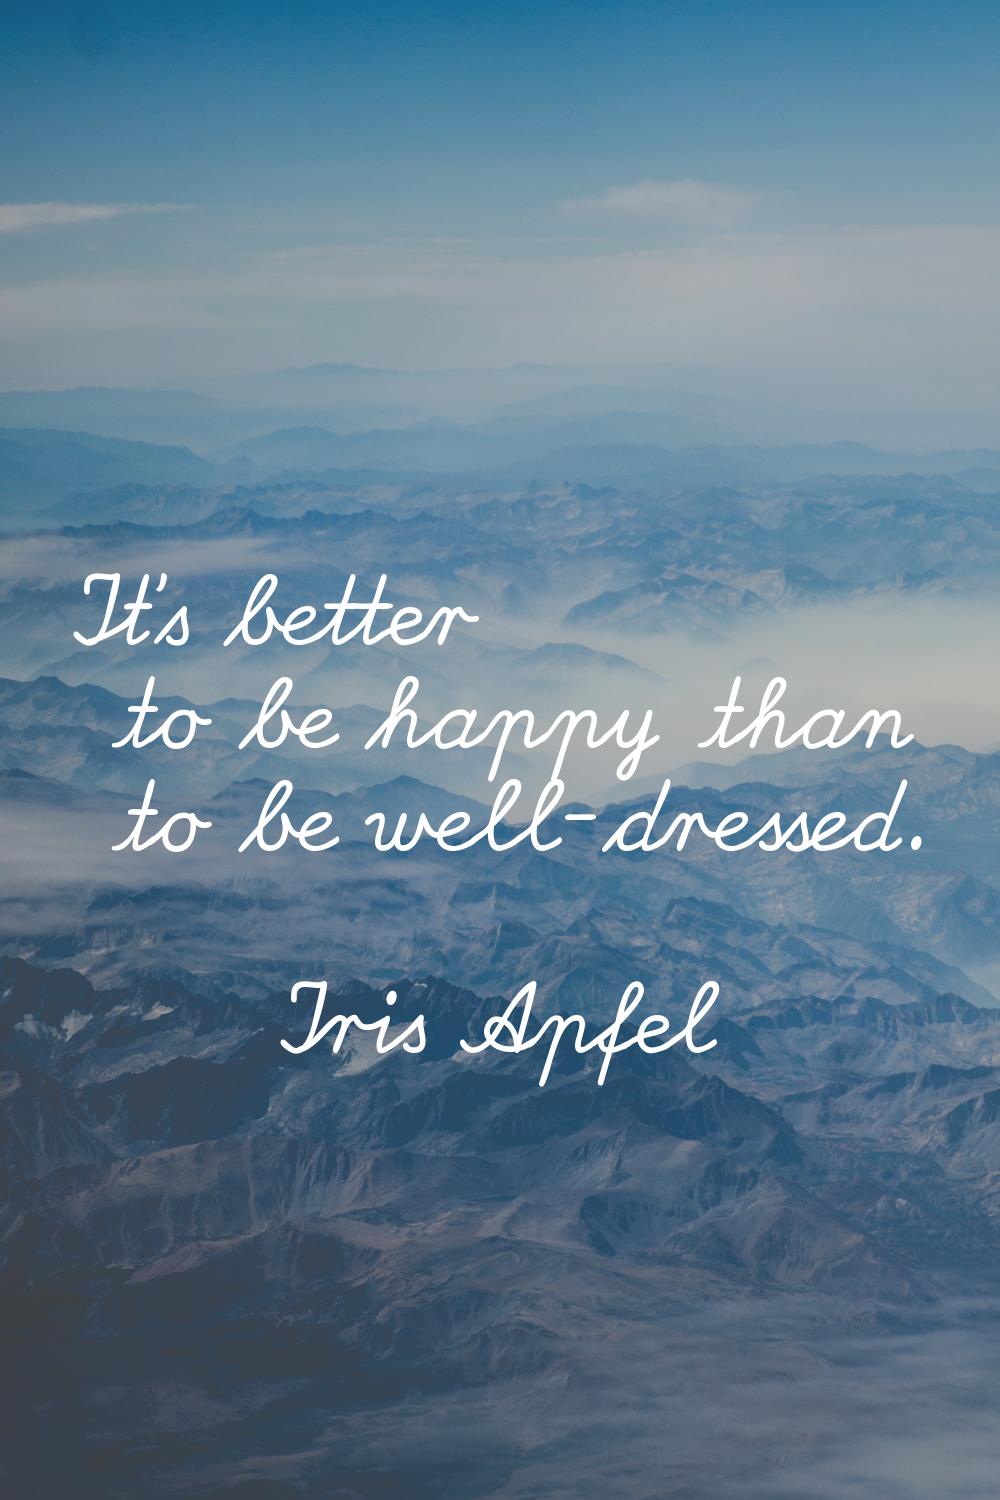 It's better to be happy than to be well-dressed.